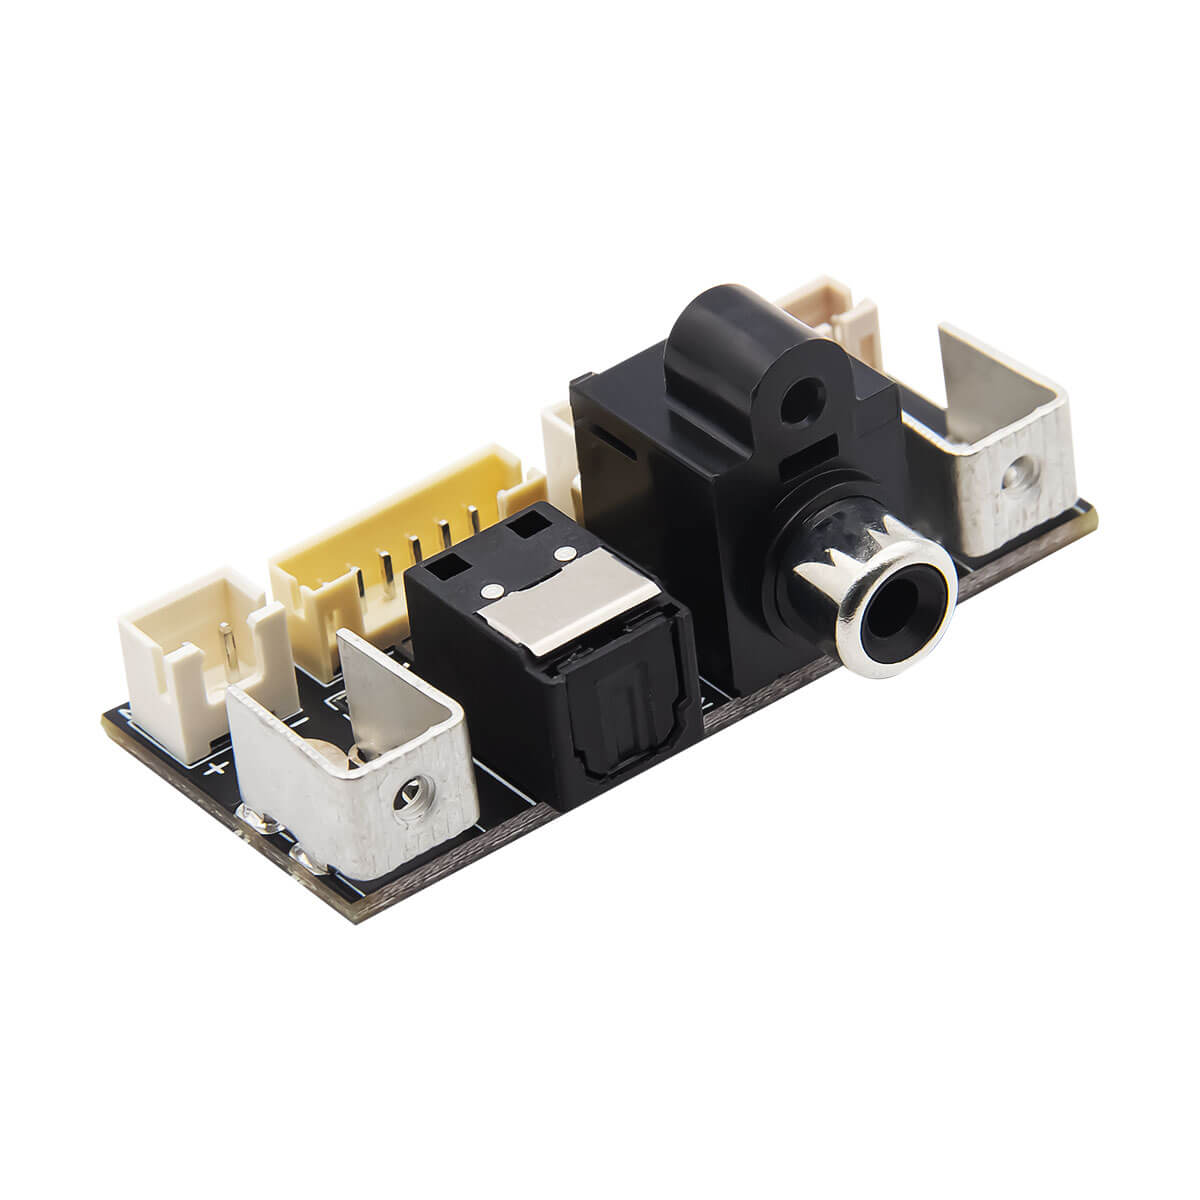 spdif out board